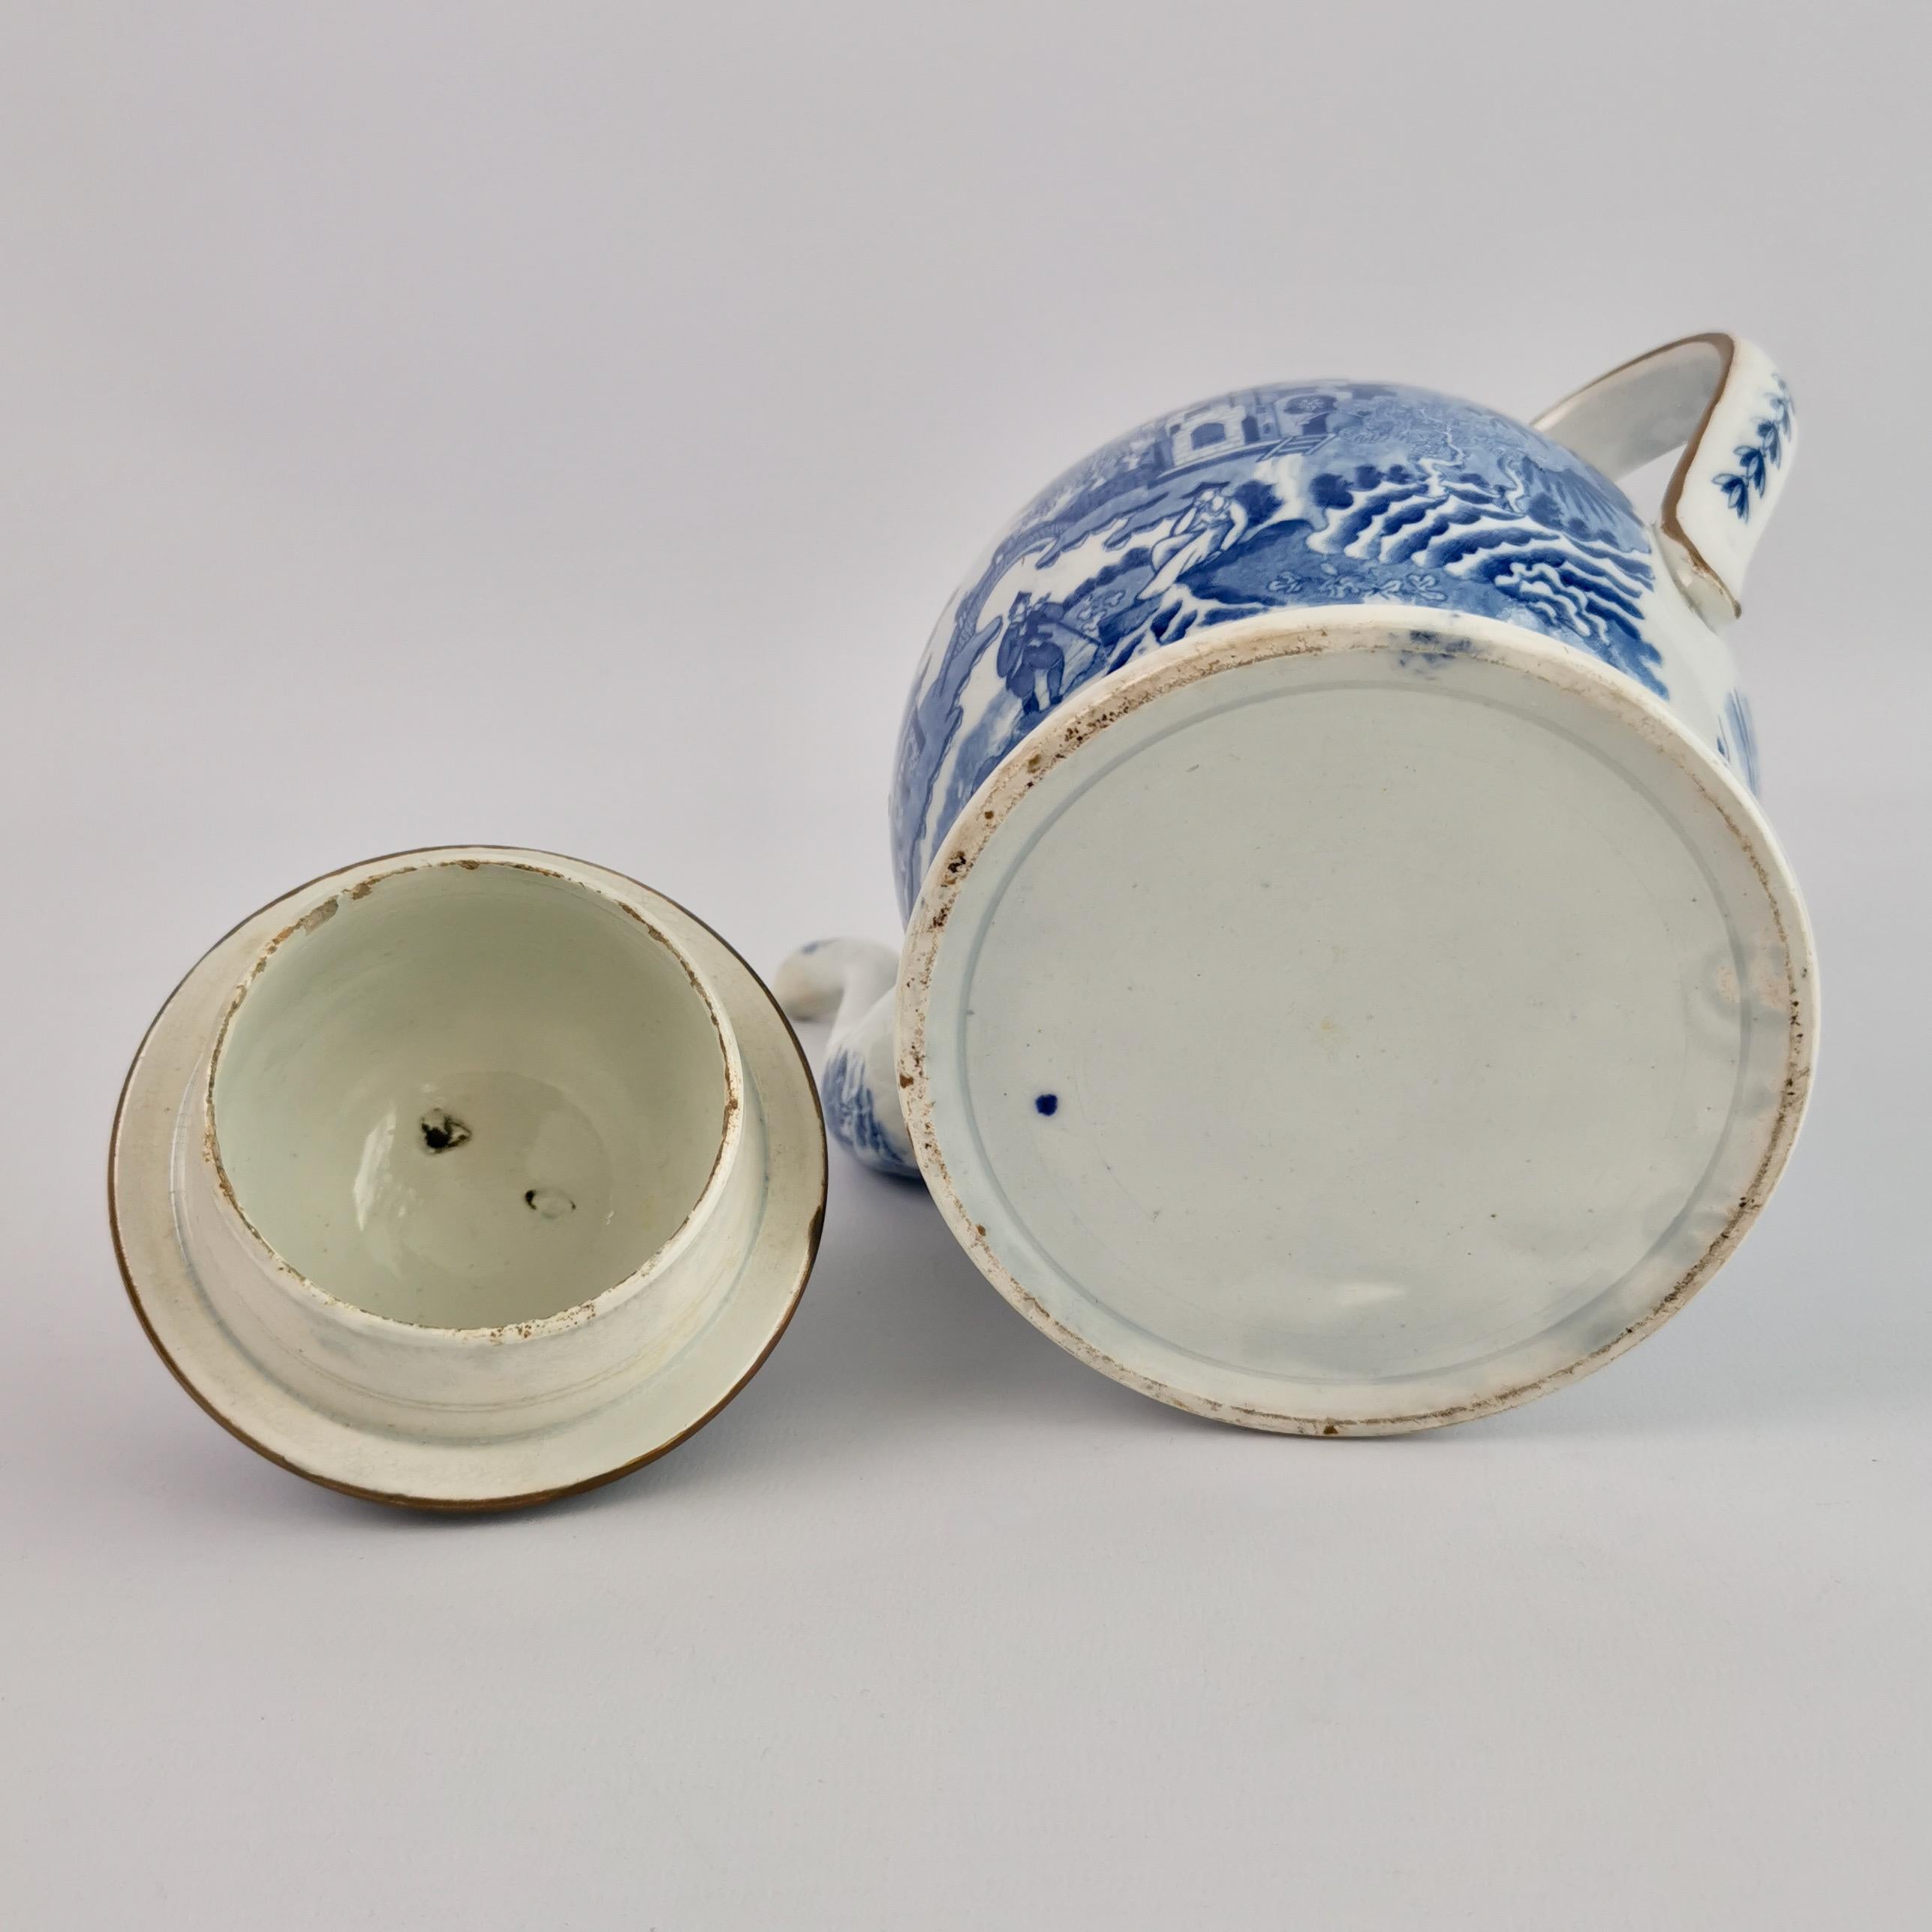 Early 19th Century Tea Coffee Service Rathbone and Miles Mason, Pagoda Blue and White, 1810-1815